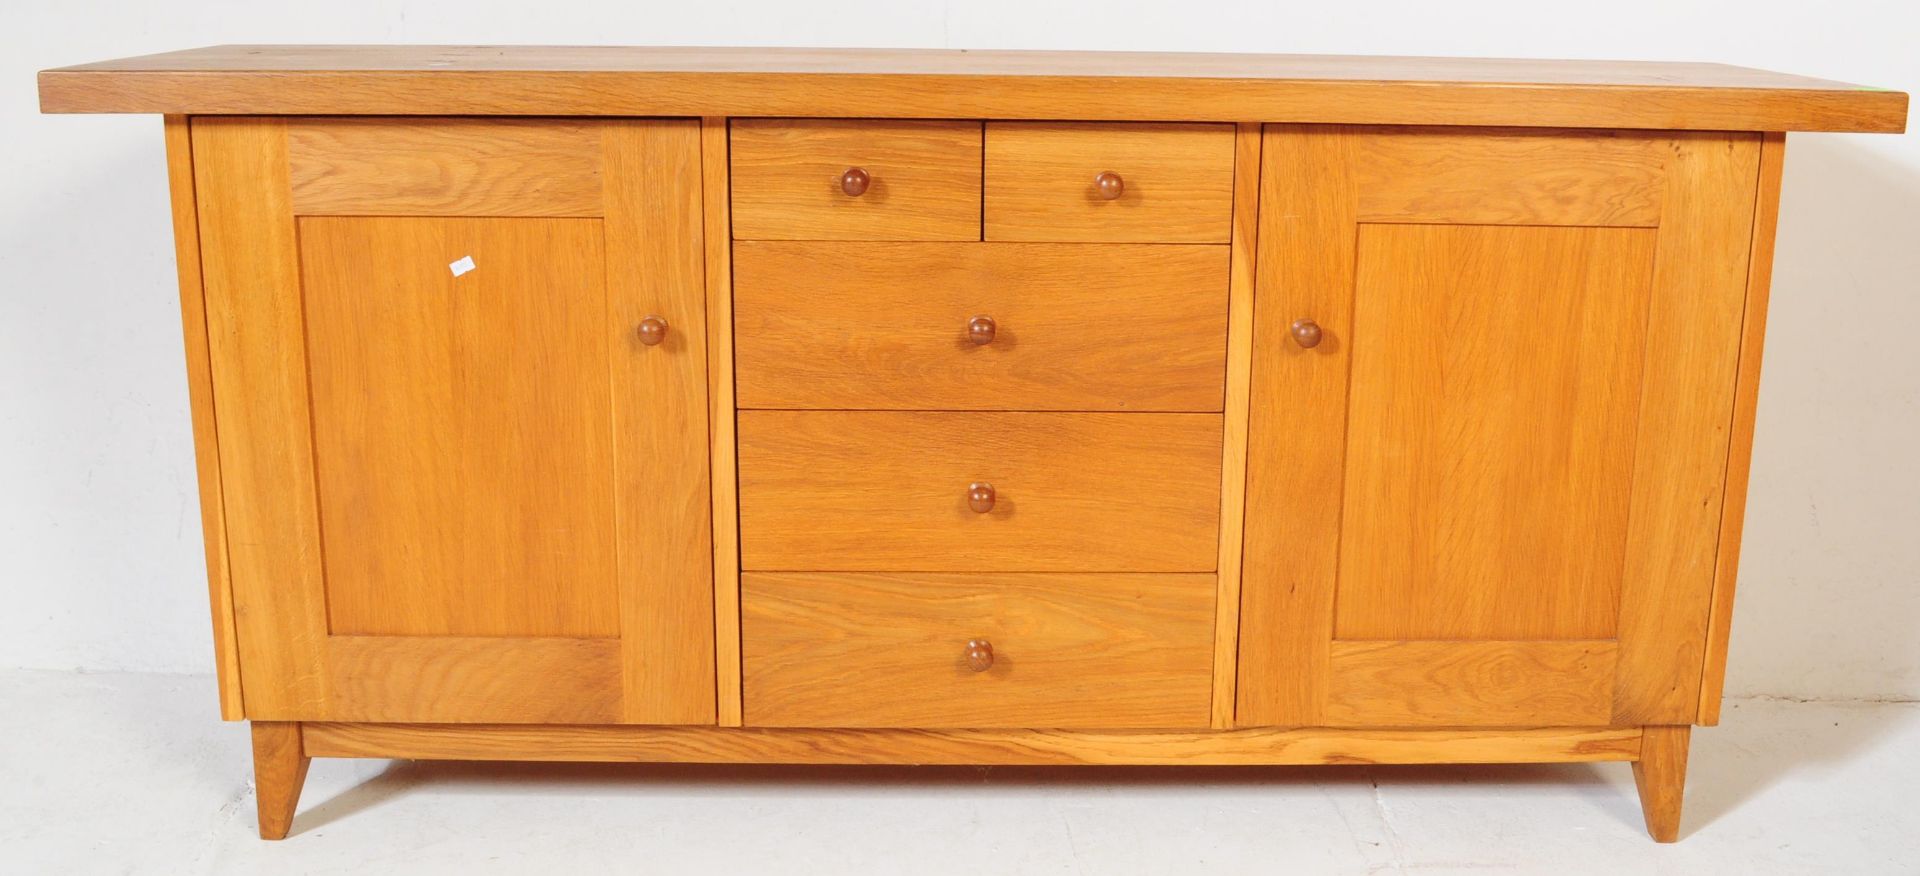 CONTEMPORARY OAK FURNITURE LAND STYLE SIDEBOARD - Image 2 of 6